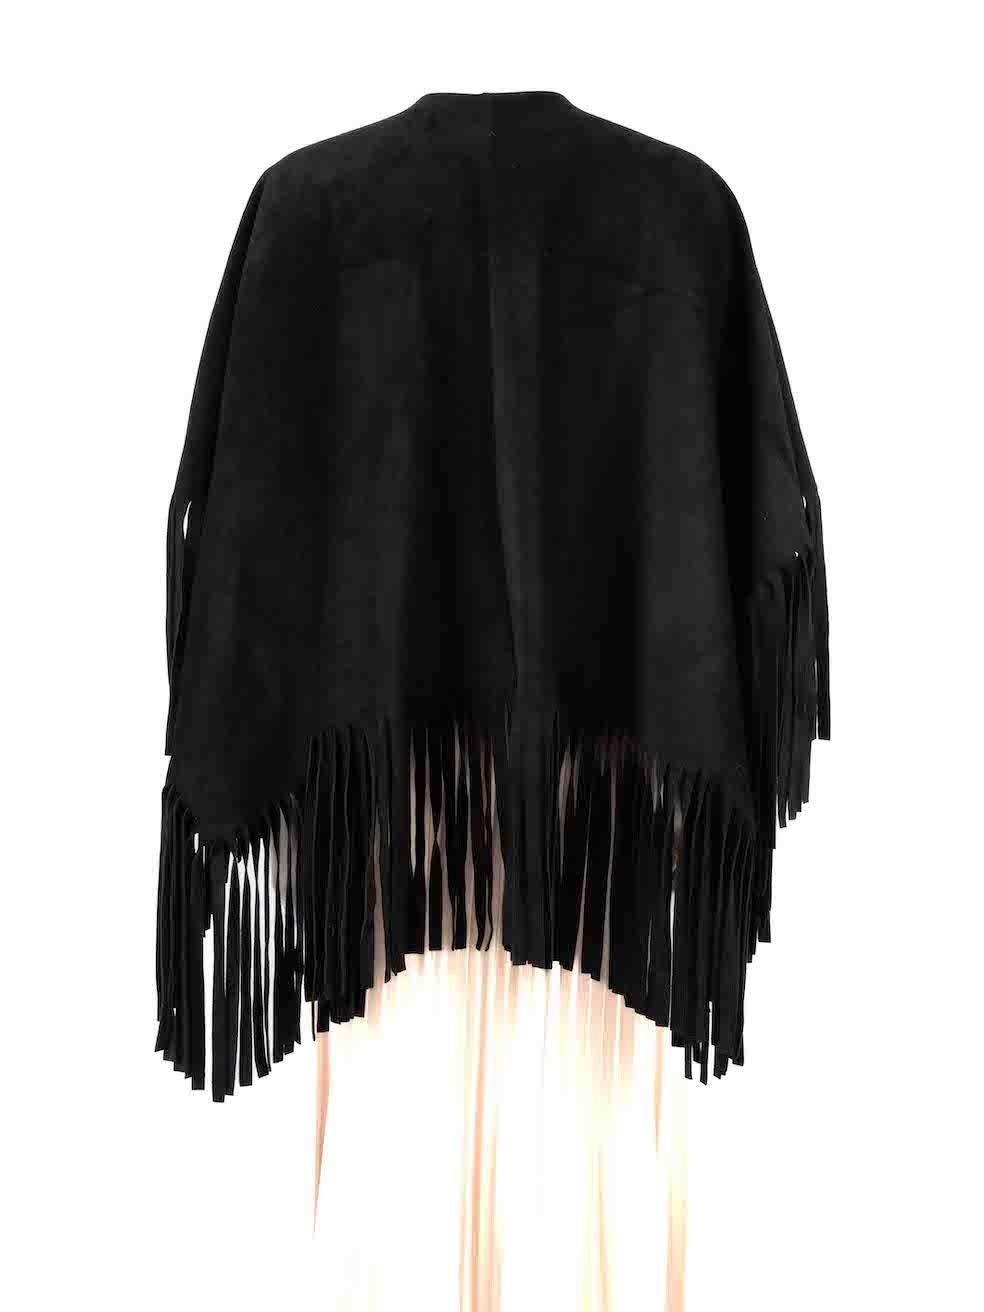 Burberry Burberry Prorsum Black Suede Fringed Poncho Size M In Good Condition For Sale In London, GB